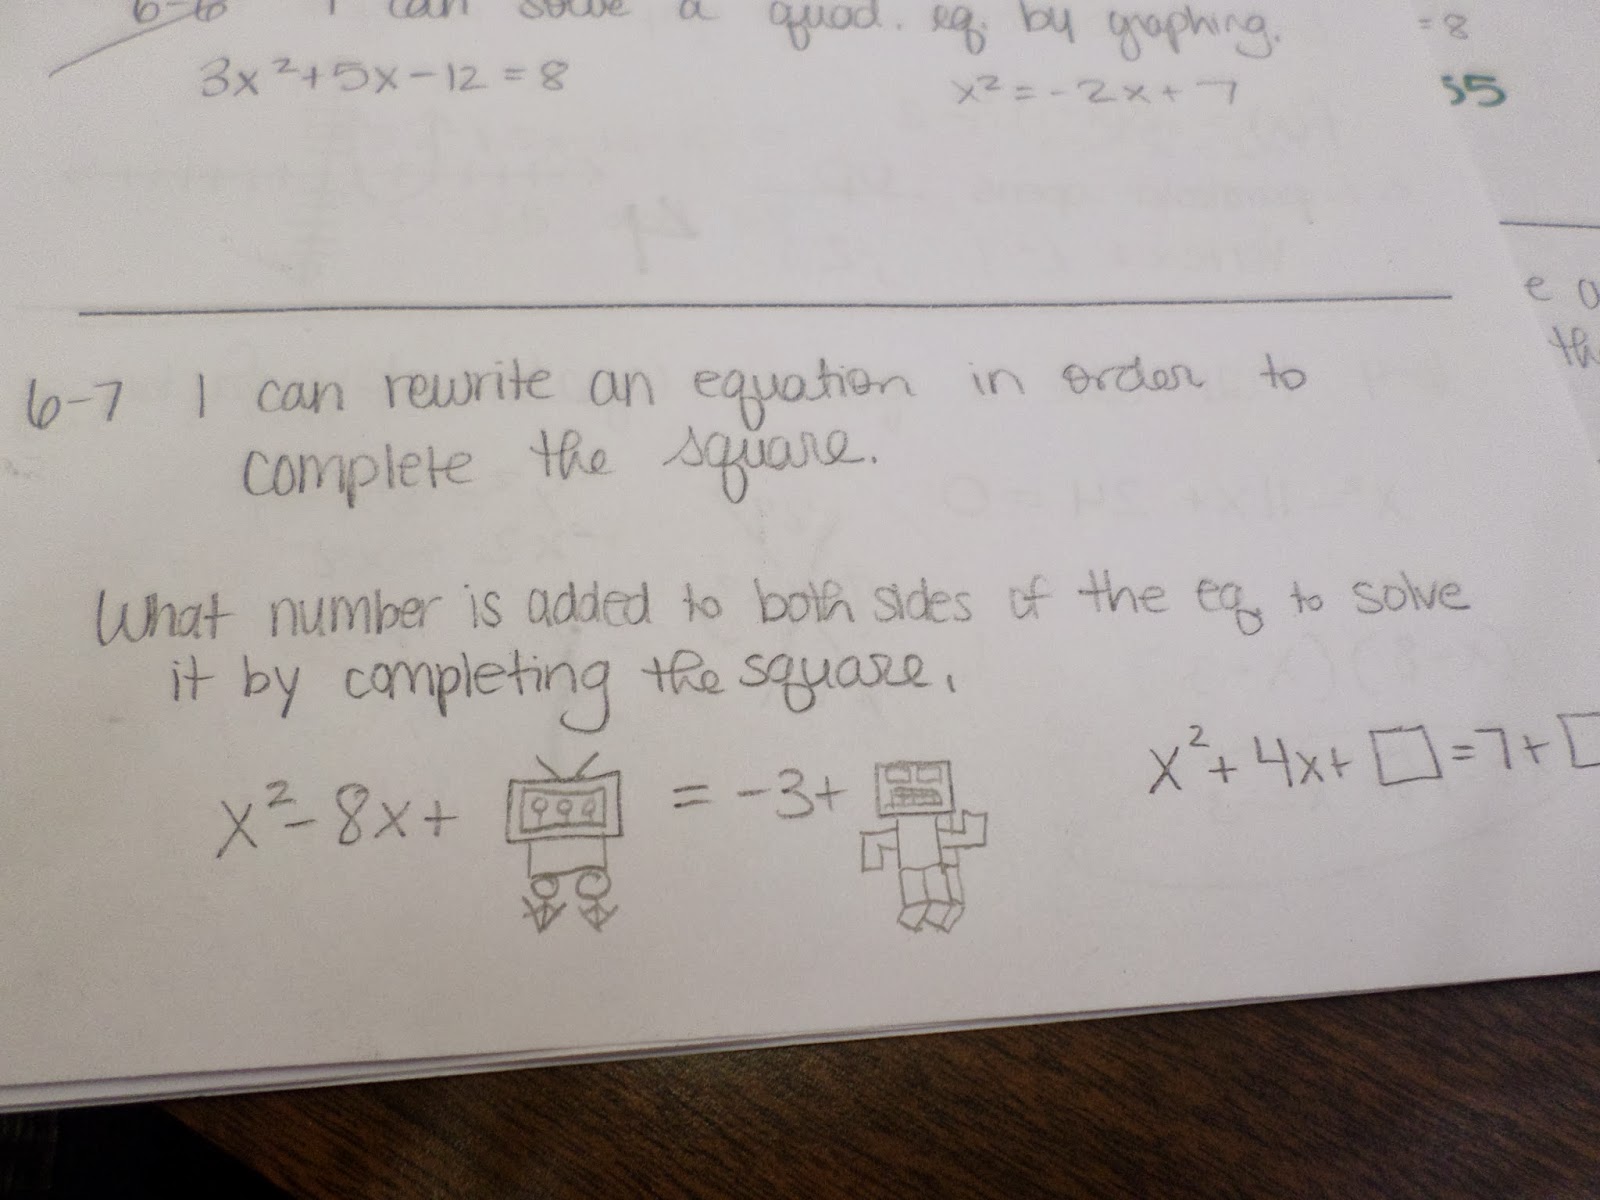 student answer to completing the square problem. 